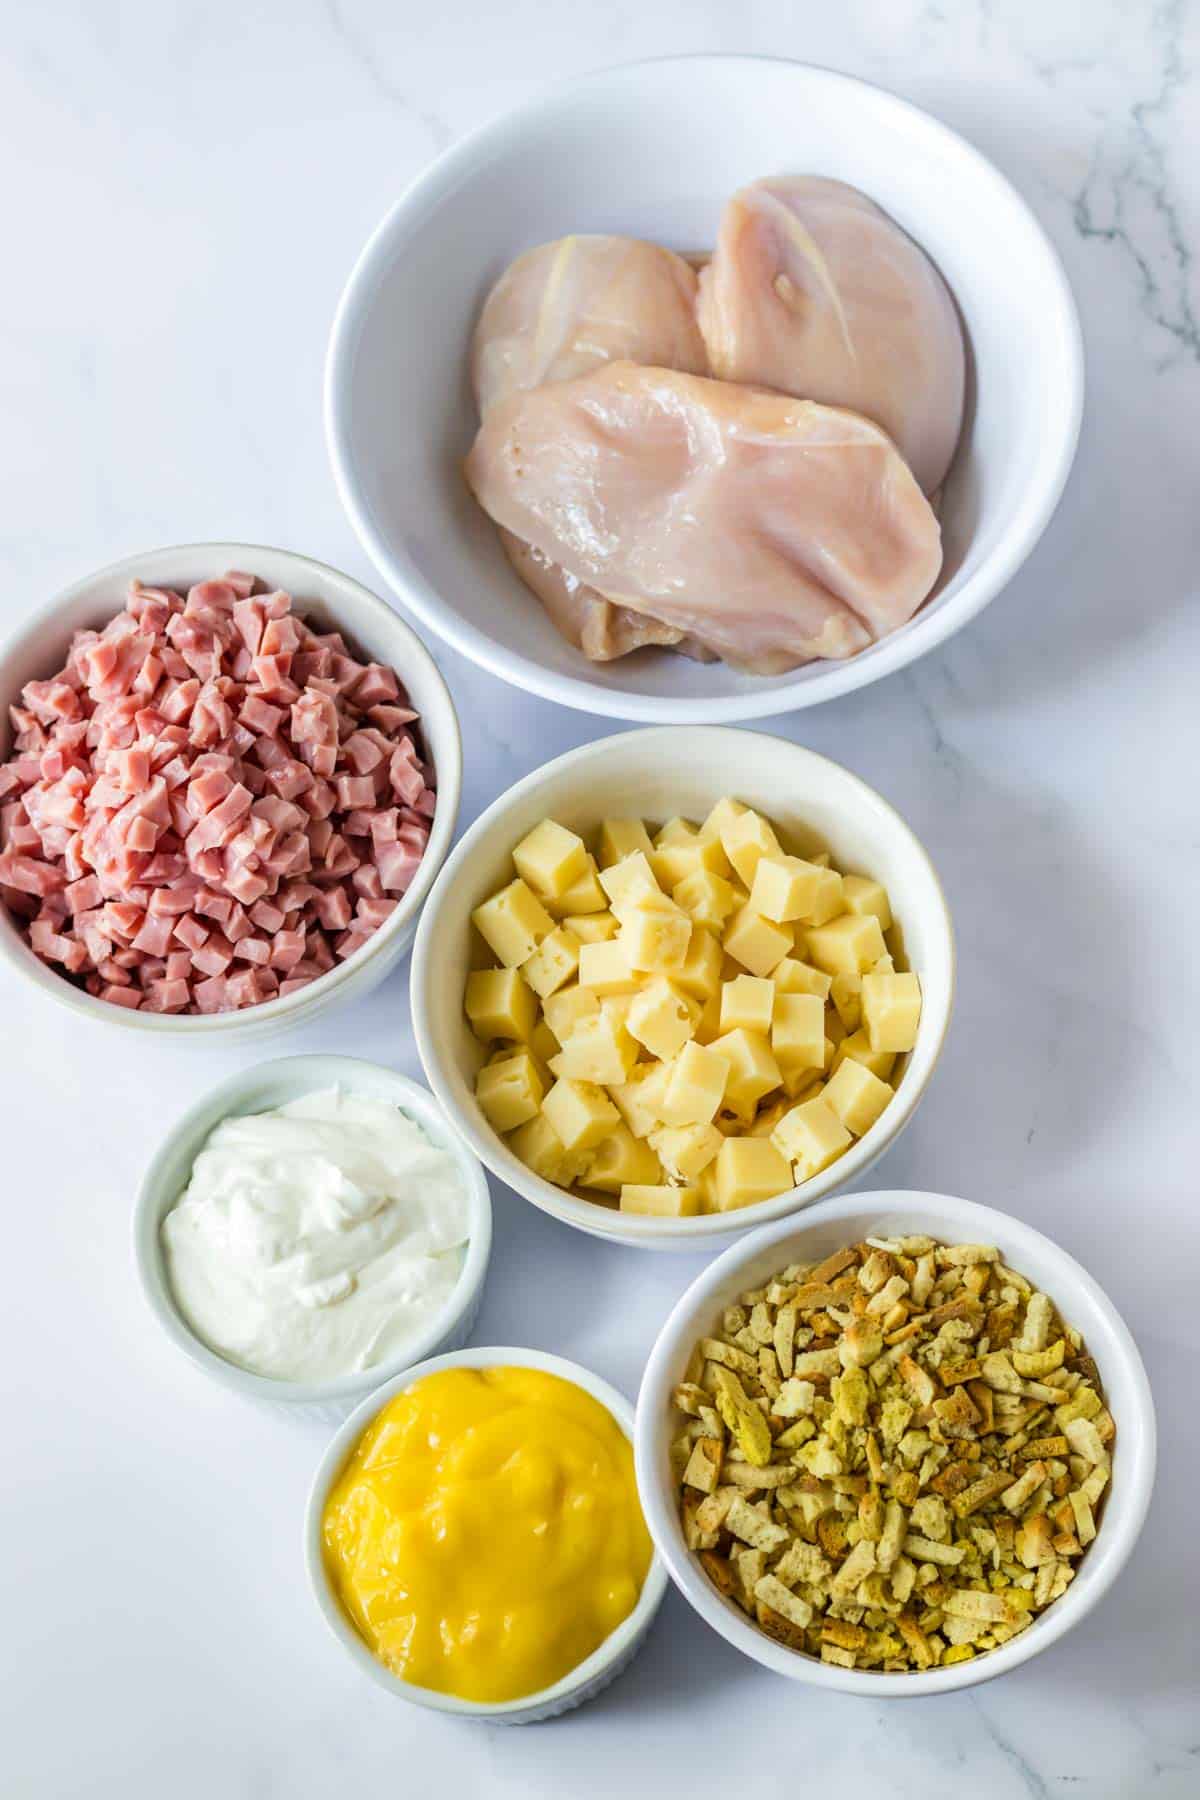 Various ingredients in bowls including chicken breasts, diced ham, cubed cheese, stuffing mix, sour cream, and mustard ready for a recipe preparation.